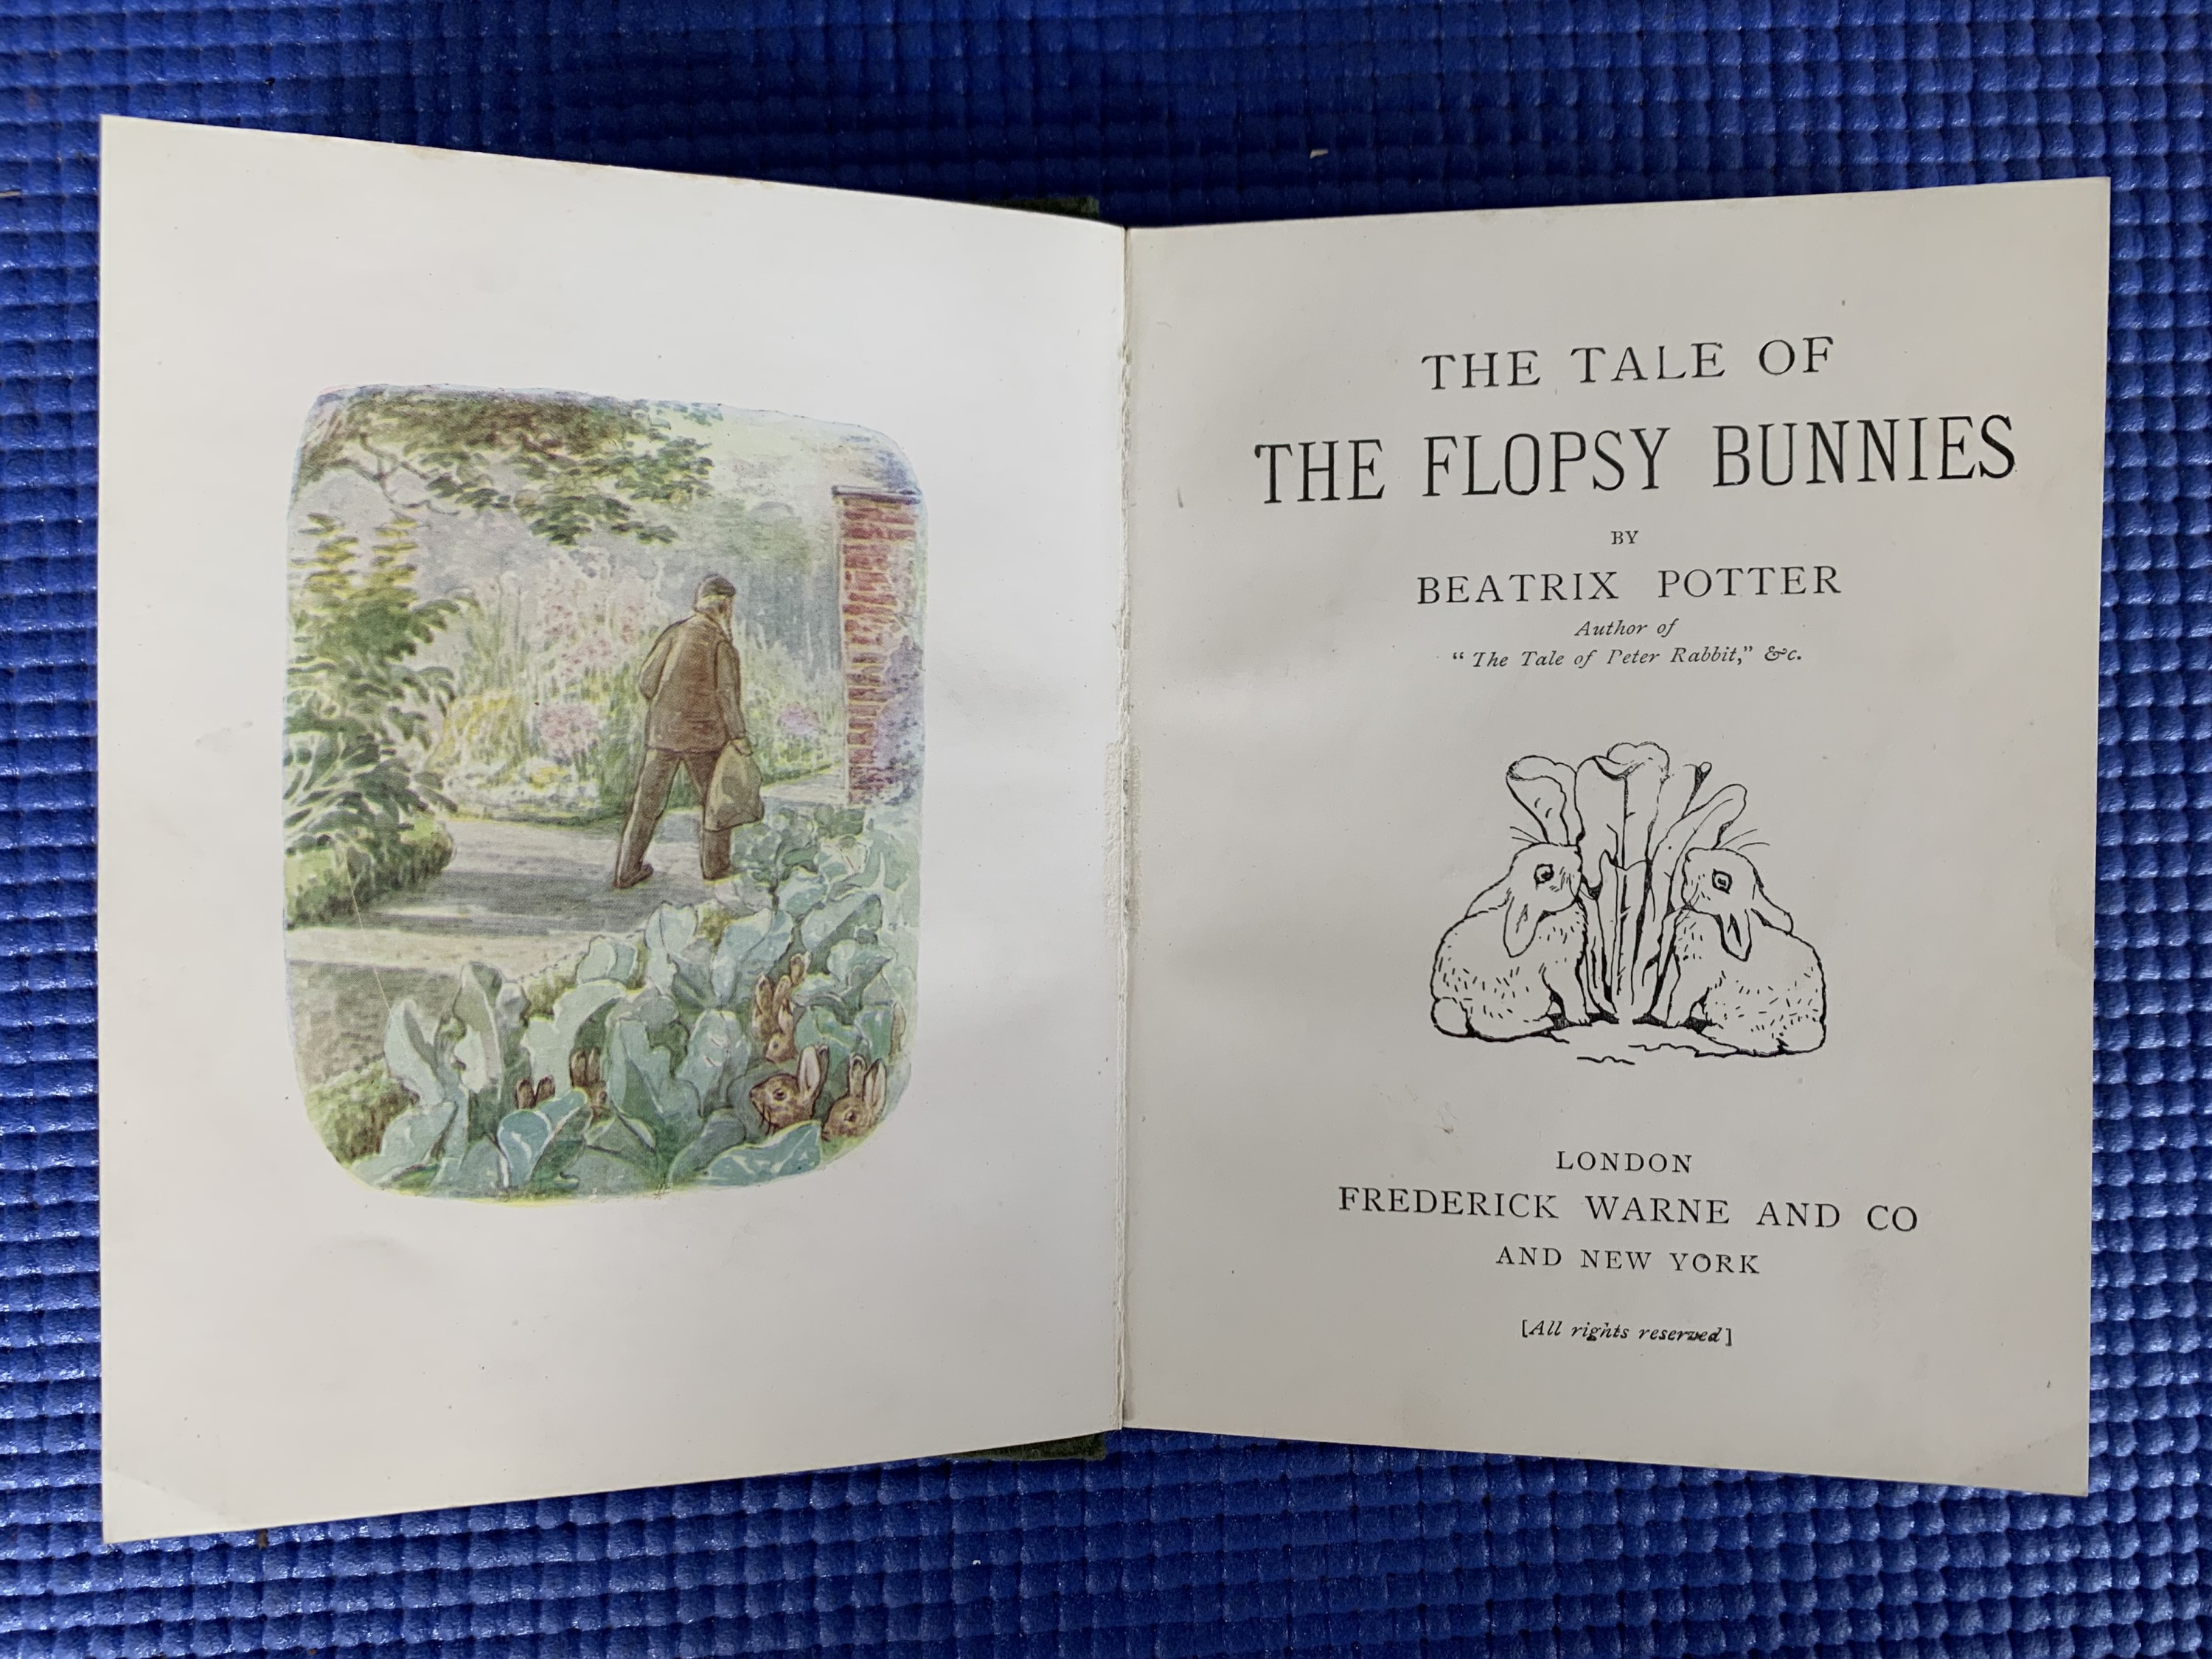 An early edition of Beatrix Potter's "The Tale of the Flopsy Bunnies", Warne, in original glassine - Image 8 of 10